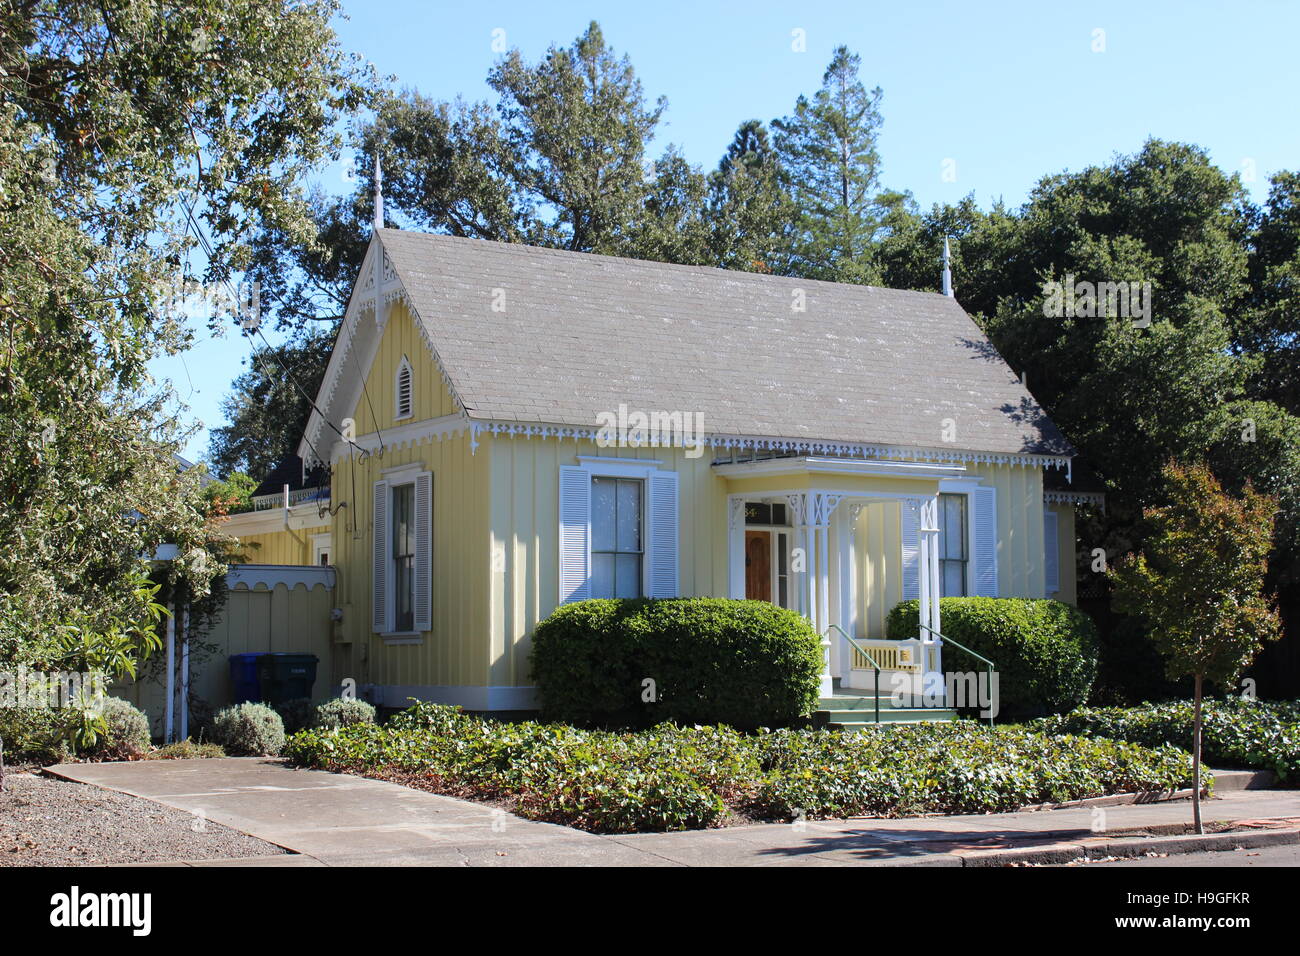 Gothic Revival Cottage built in 1847 in Sonoma, California Stock Photo